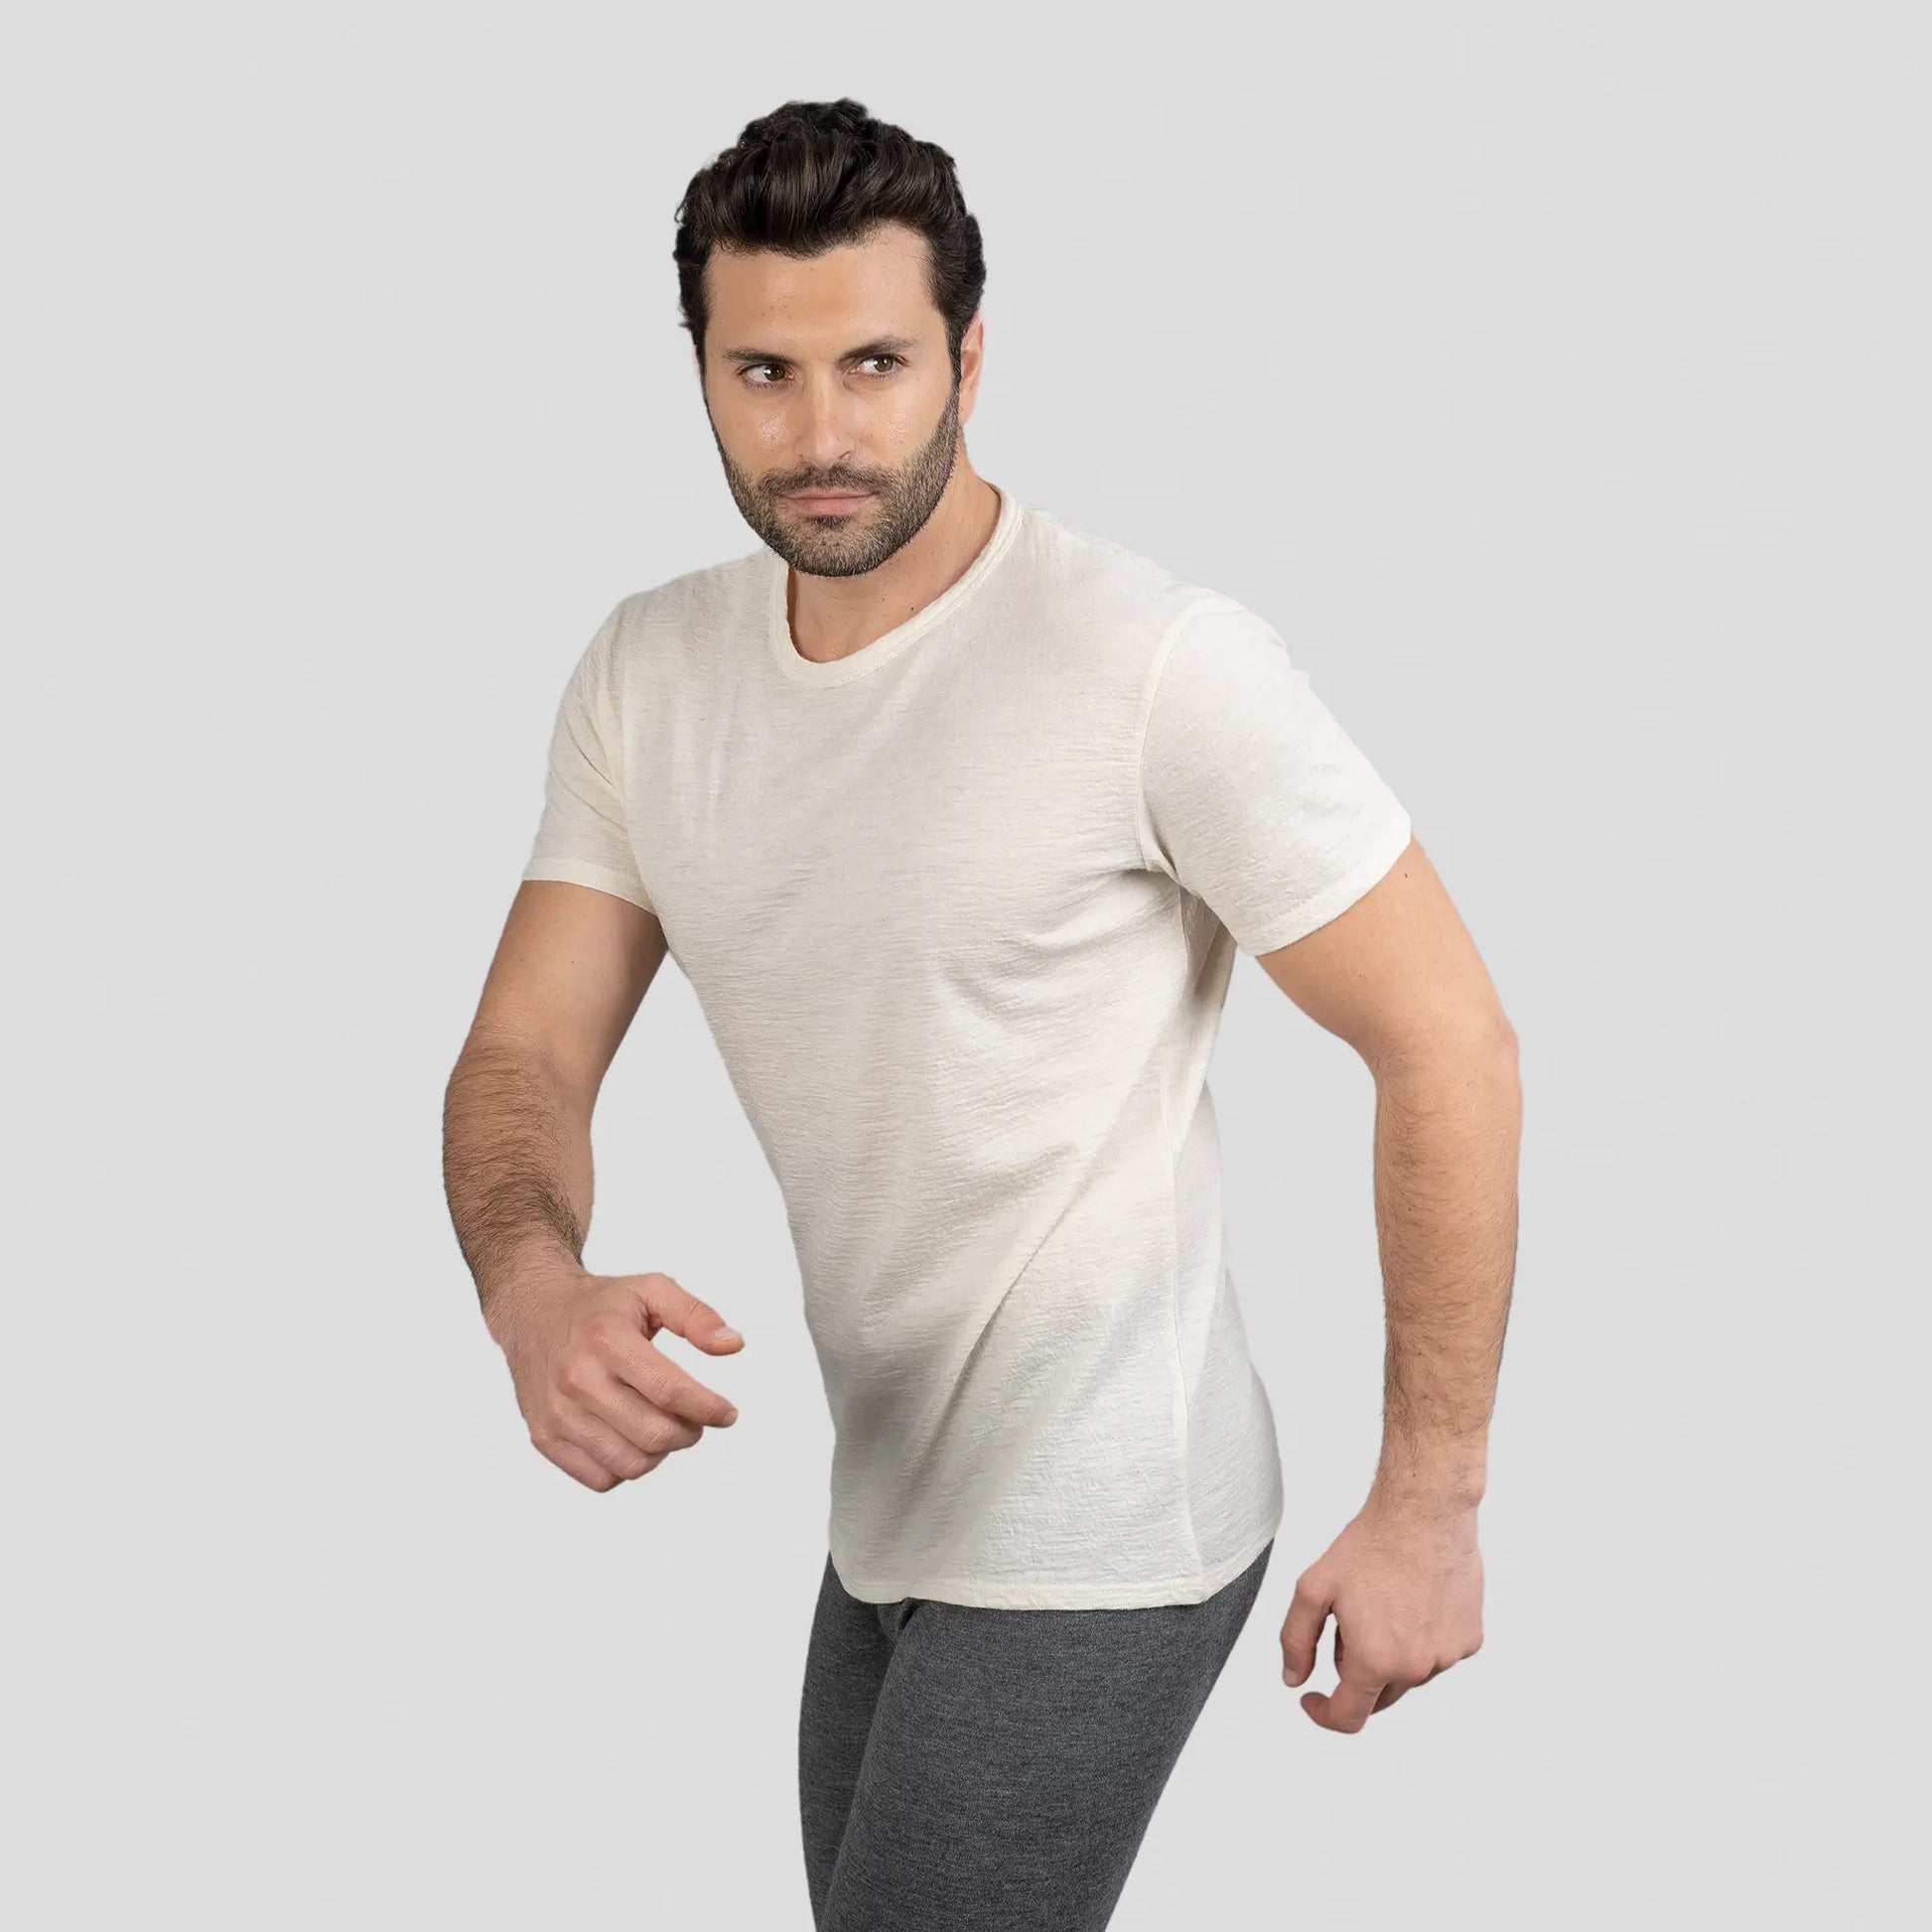 mens ultimate outdoor crew neck tshirt color natural white